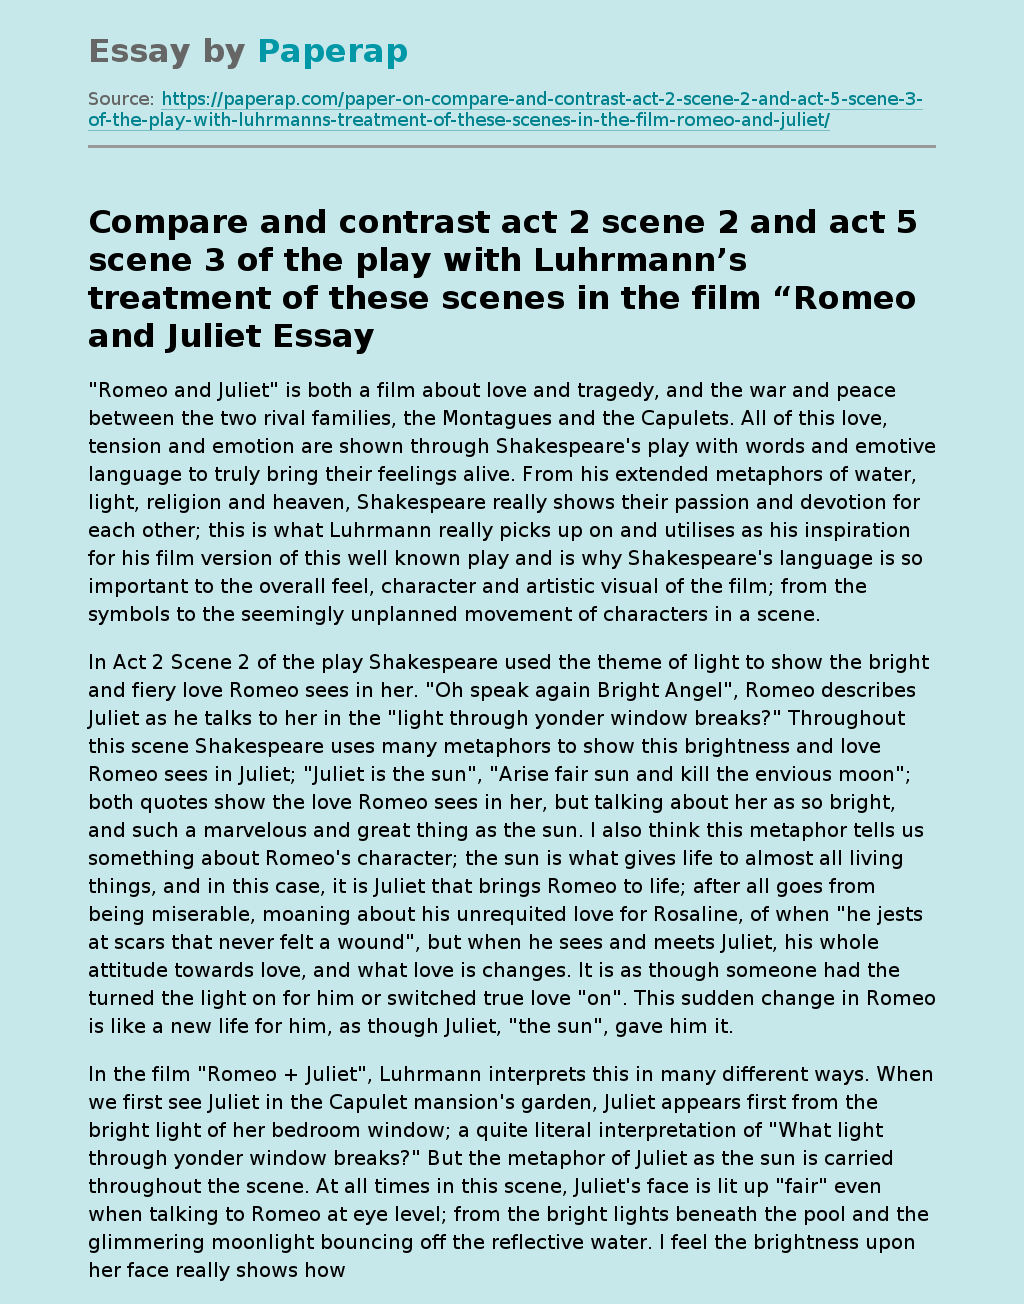 Compare and contrast act 2 scene 2 and act 5 scene 3 of the play with Luhrmann’s treatment of these scenes in the film “Romeo and Juliet